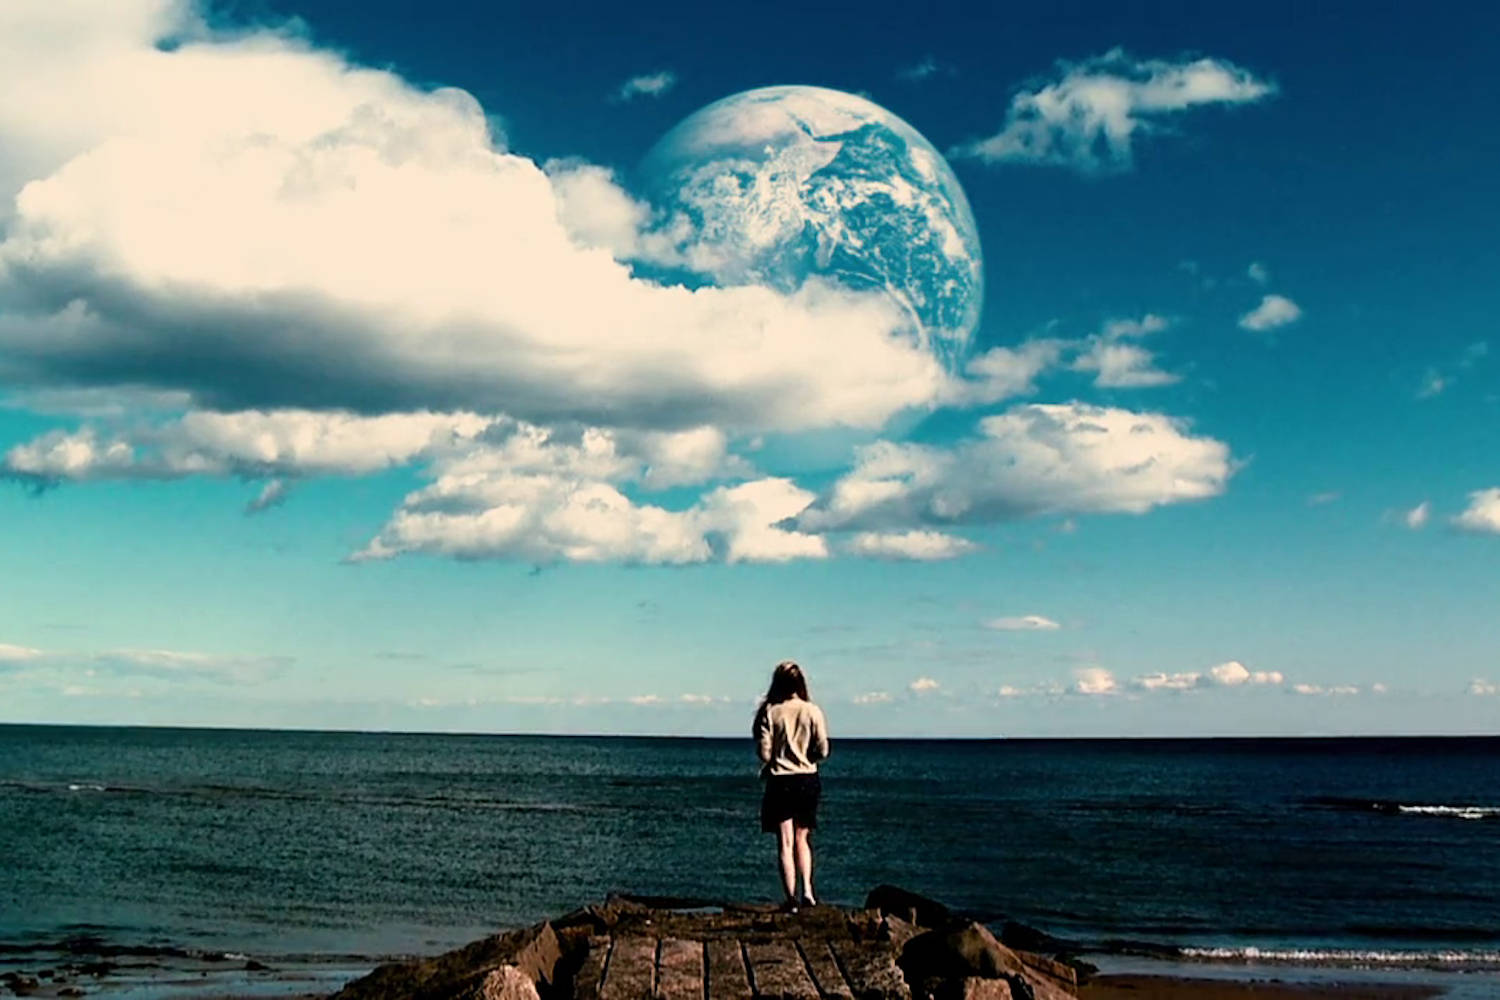 Still from Another Earth